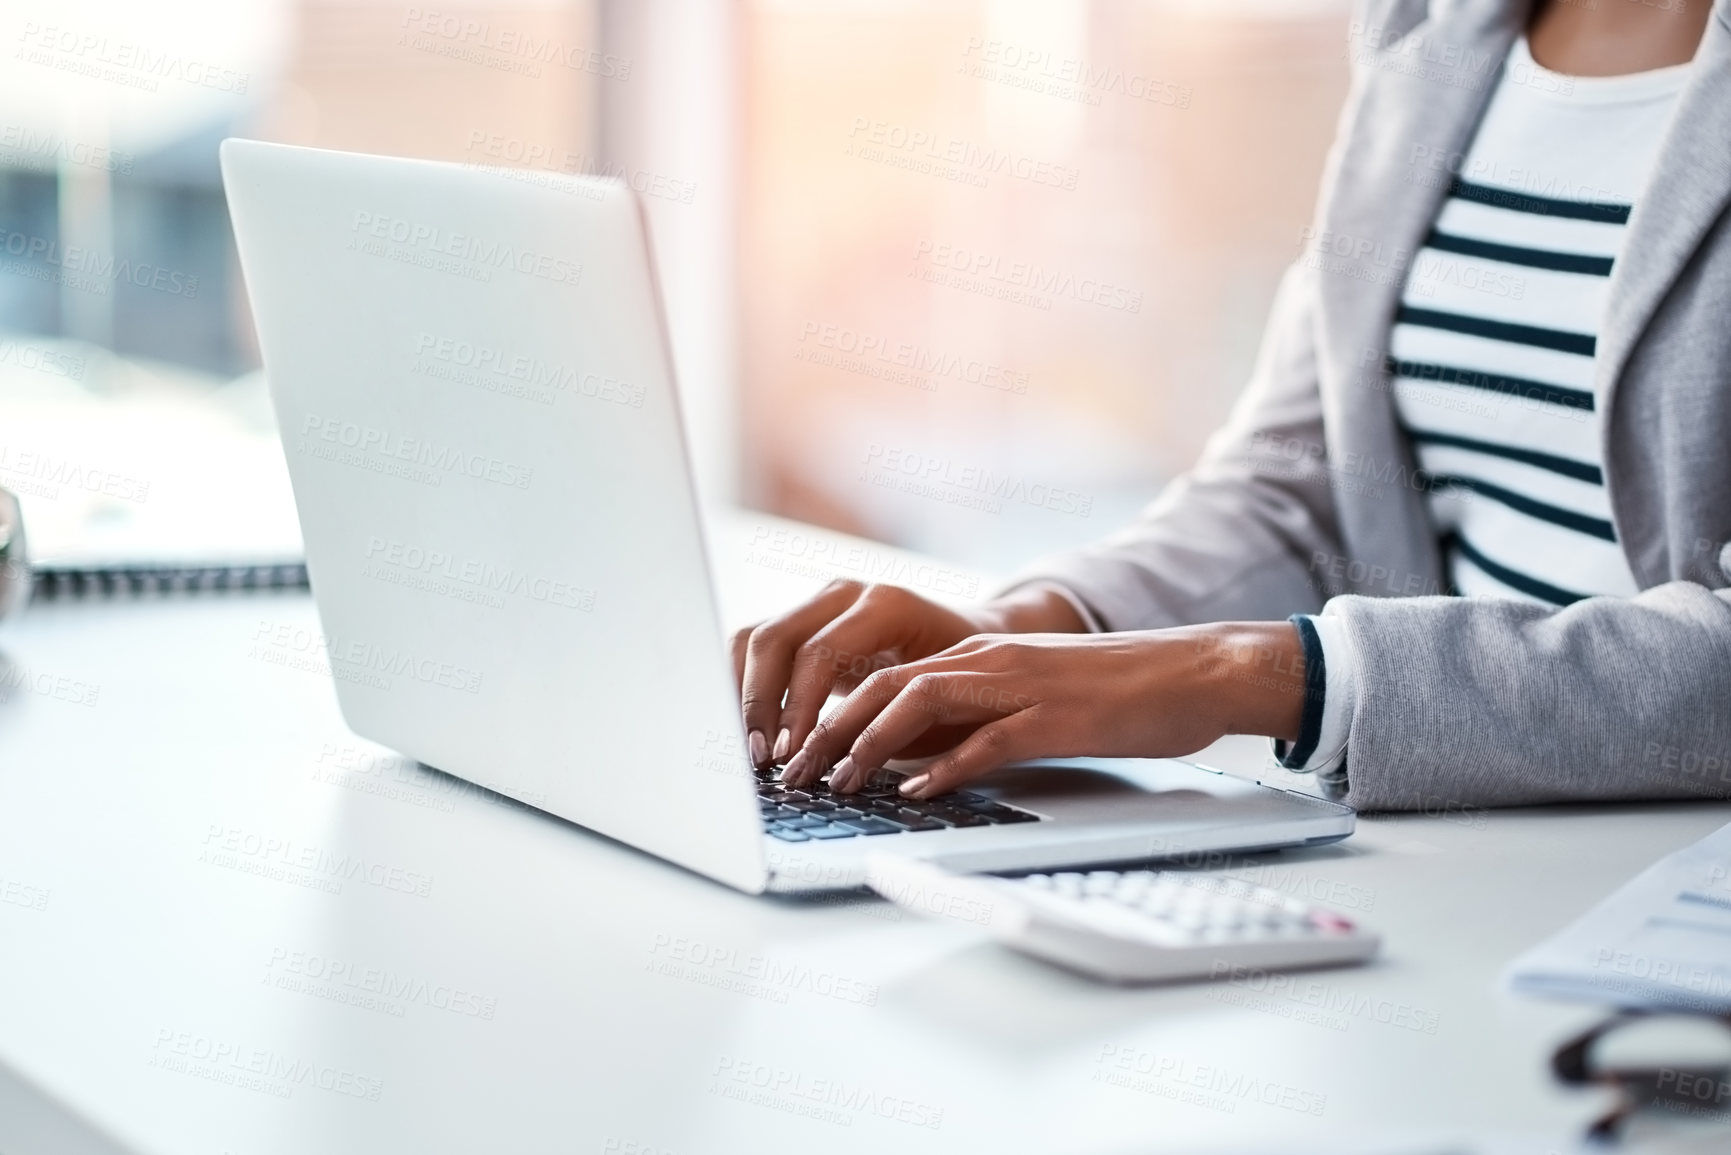 Buy stock photo Hands, businesswoman typing on laptop and in office sitting at her desk at work. Social networking or technology, business and female person type an email or write a financial report at her workplace